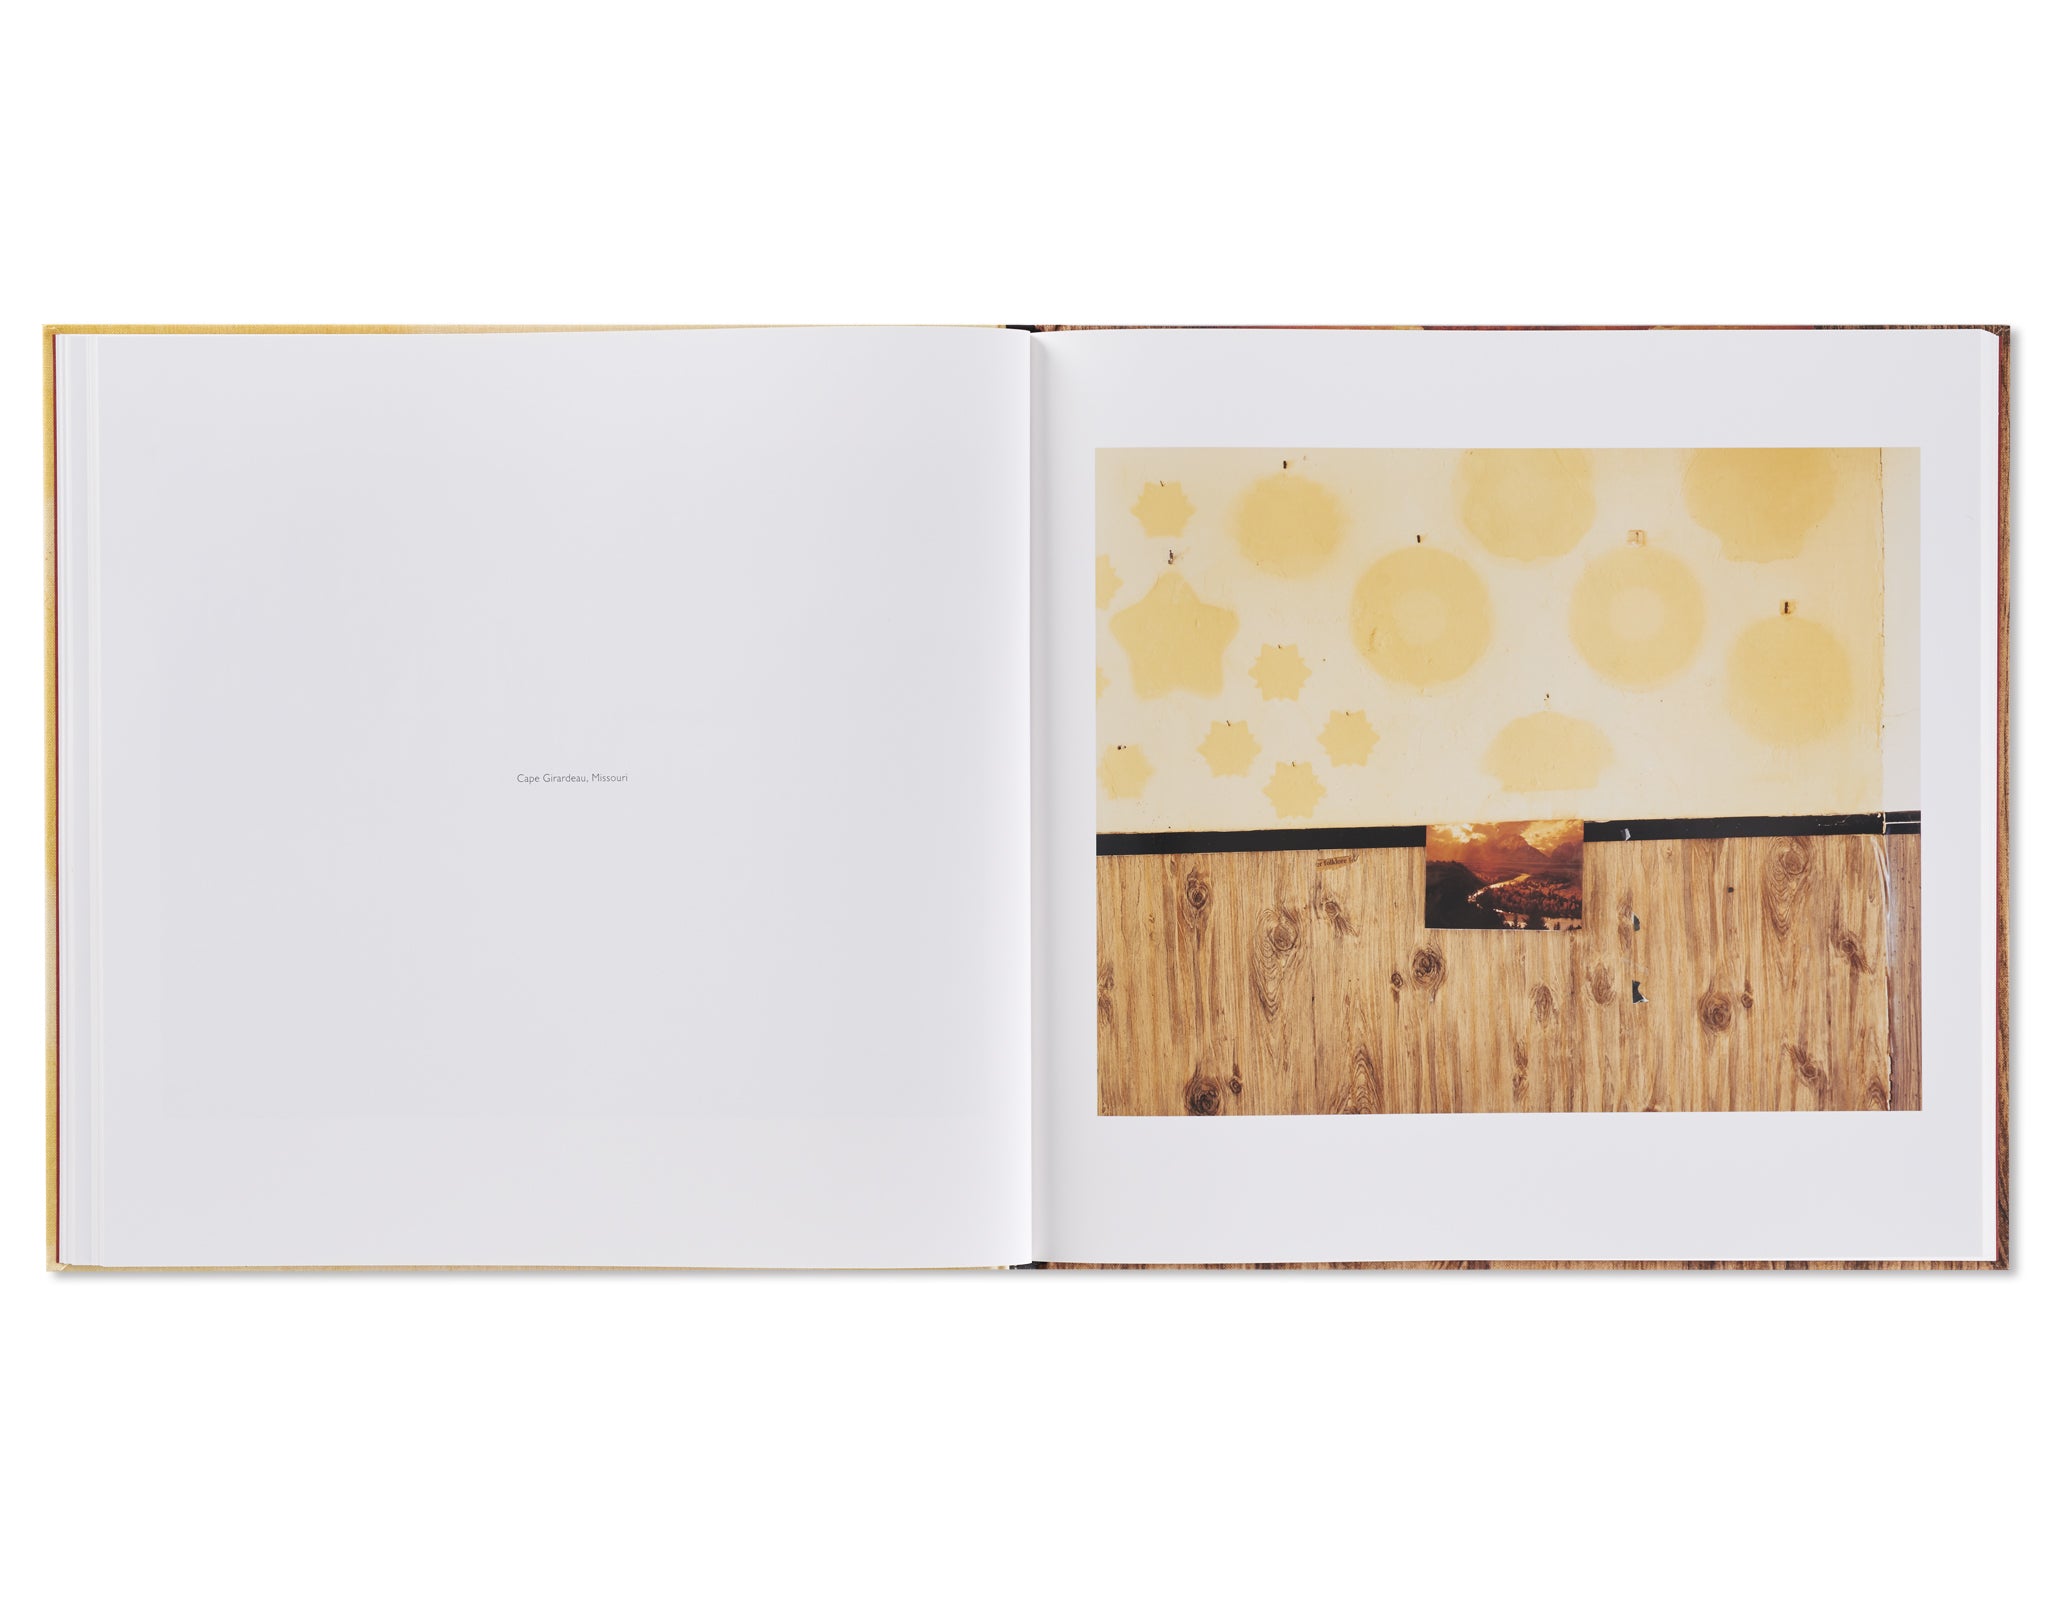 SLEEPING BY THE MISSISSIPPI by Alec Soth [SPECIAL EDITION]